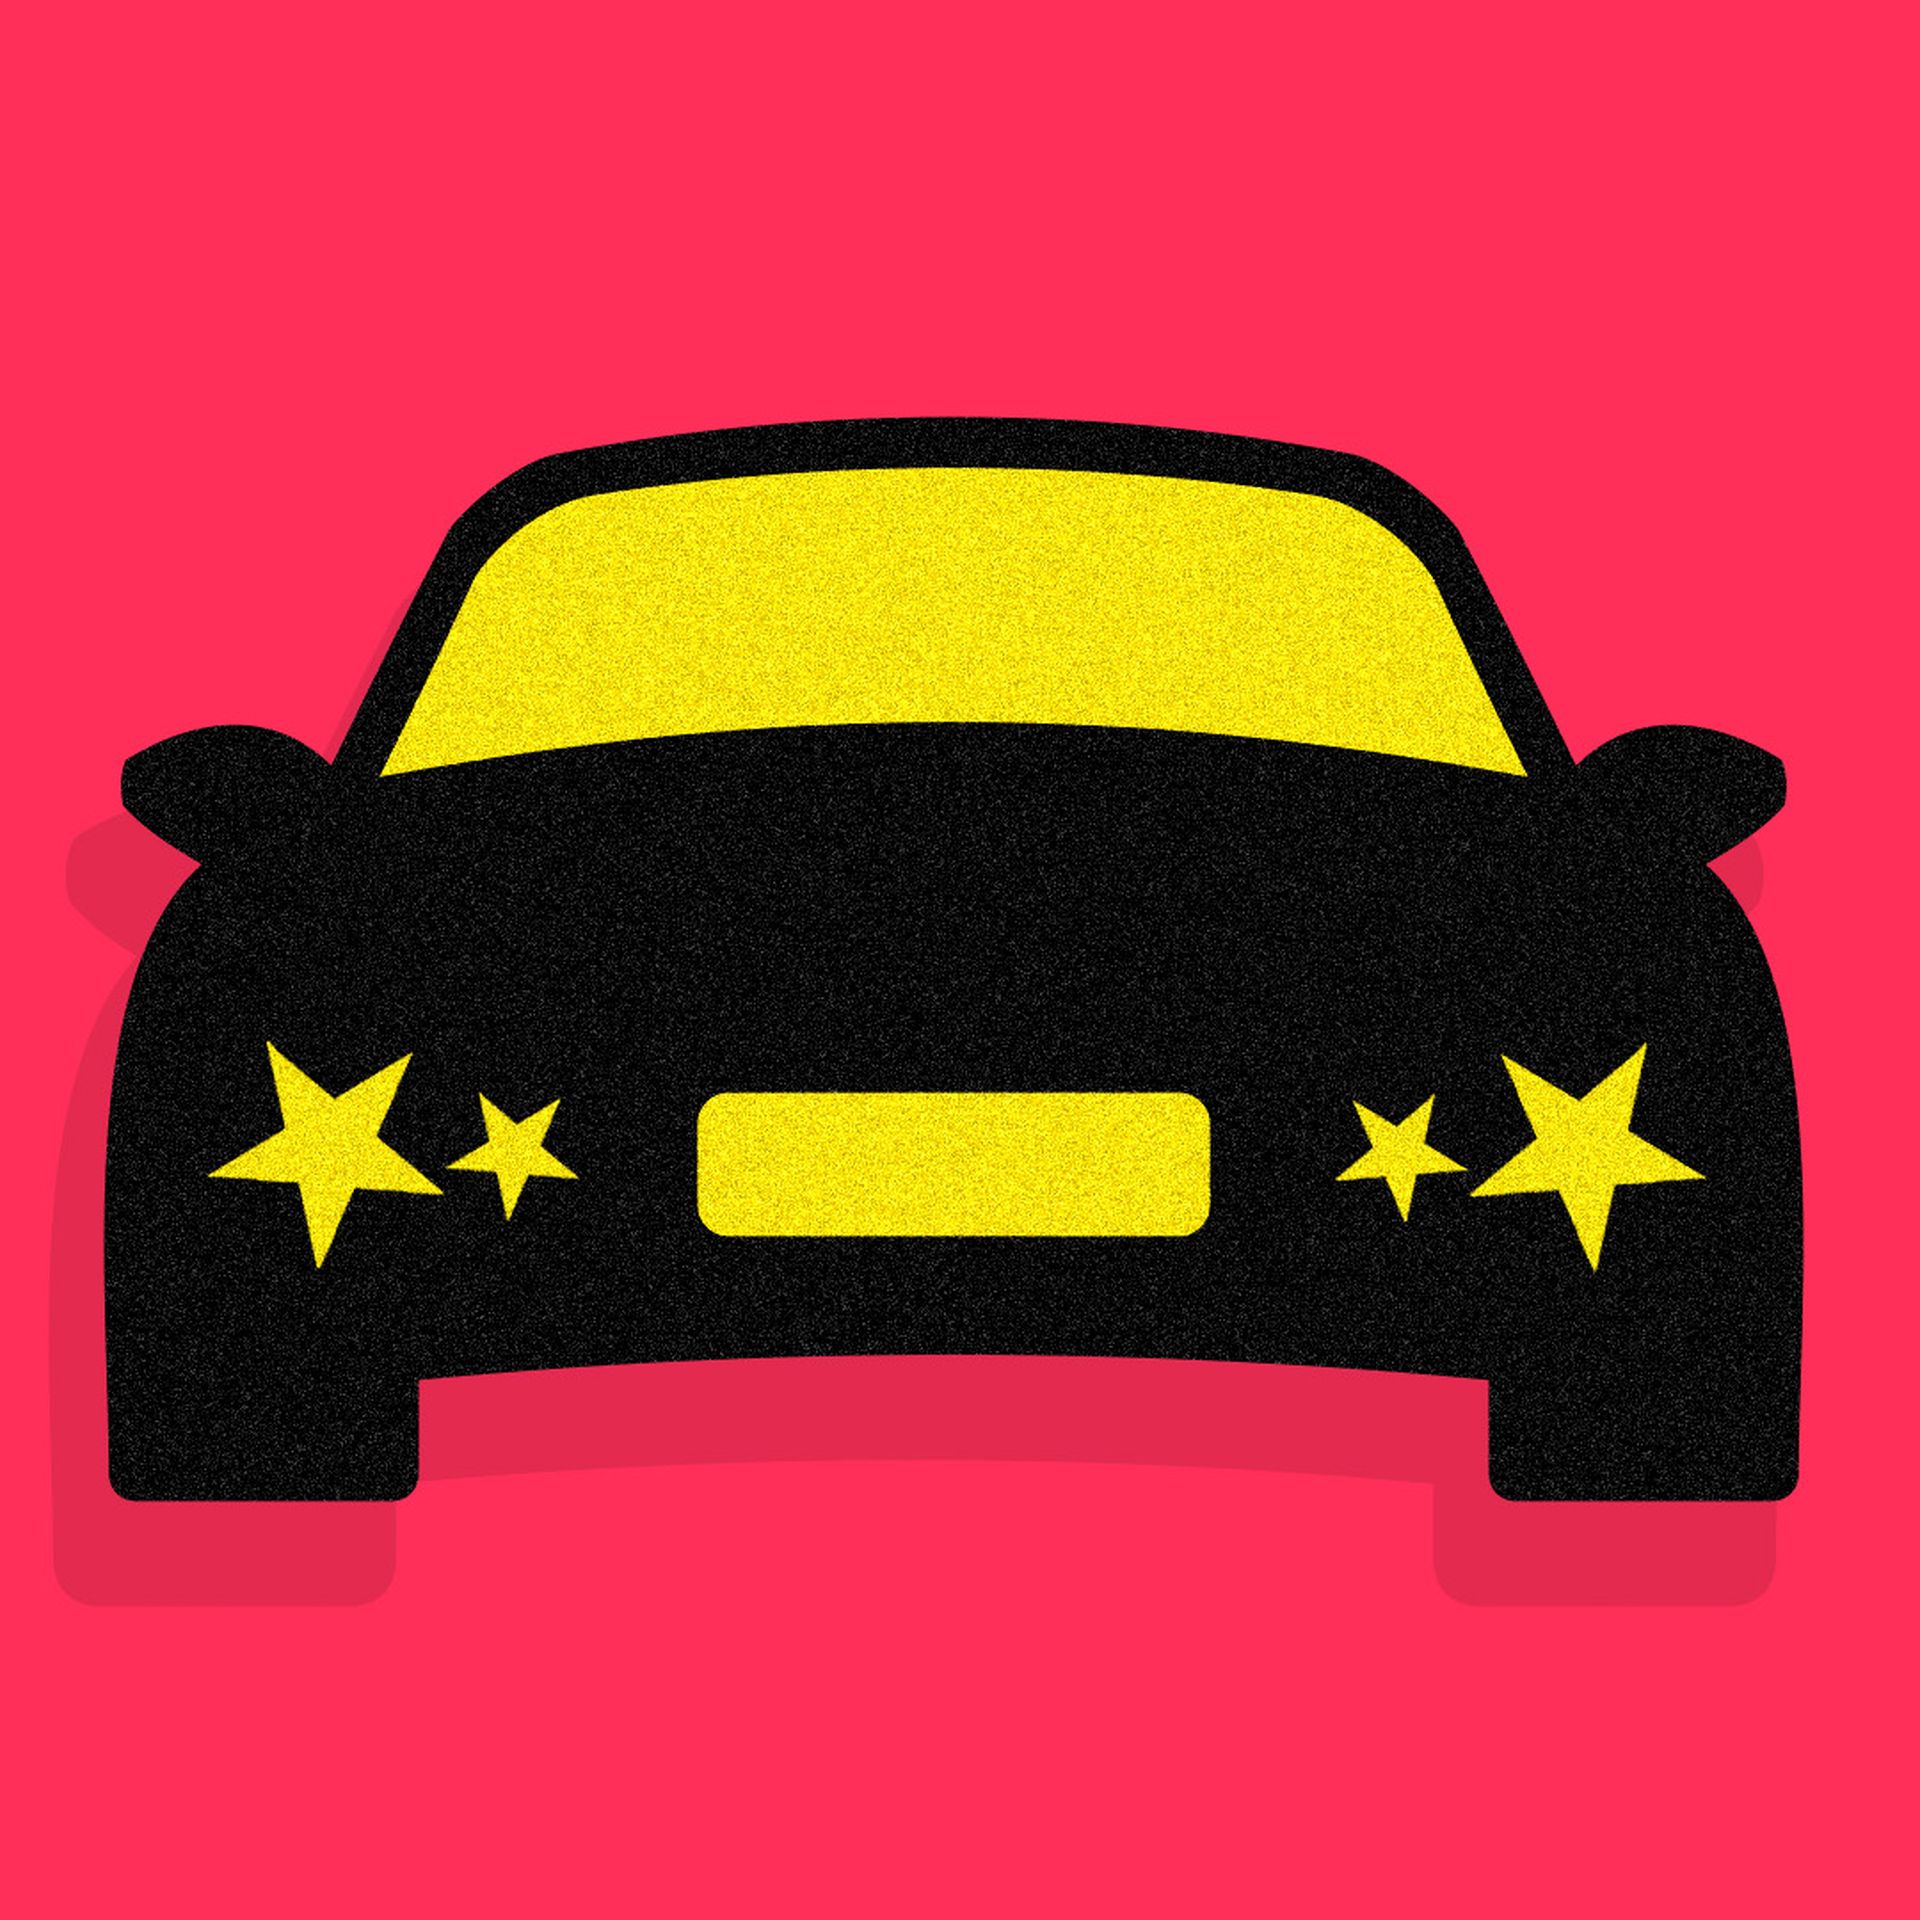 Illustration of a car with stars instead of headlights